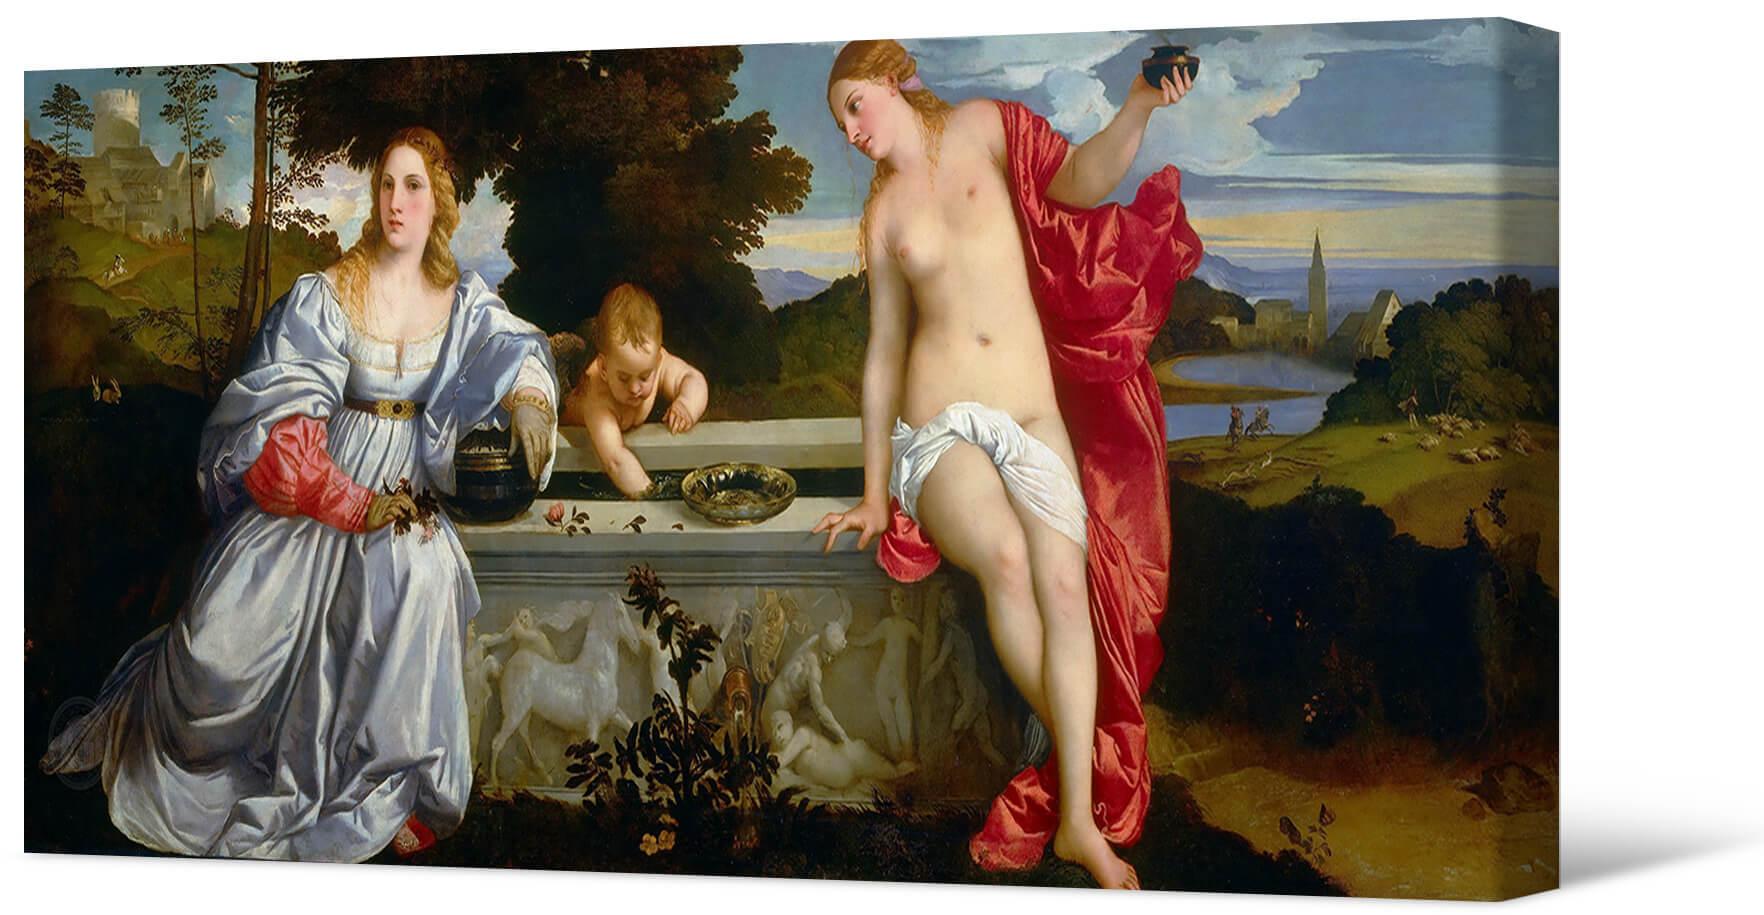 Picture Titian - Heavenly Love and Earthly Love